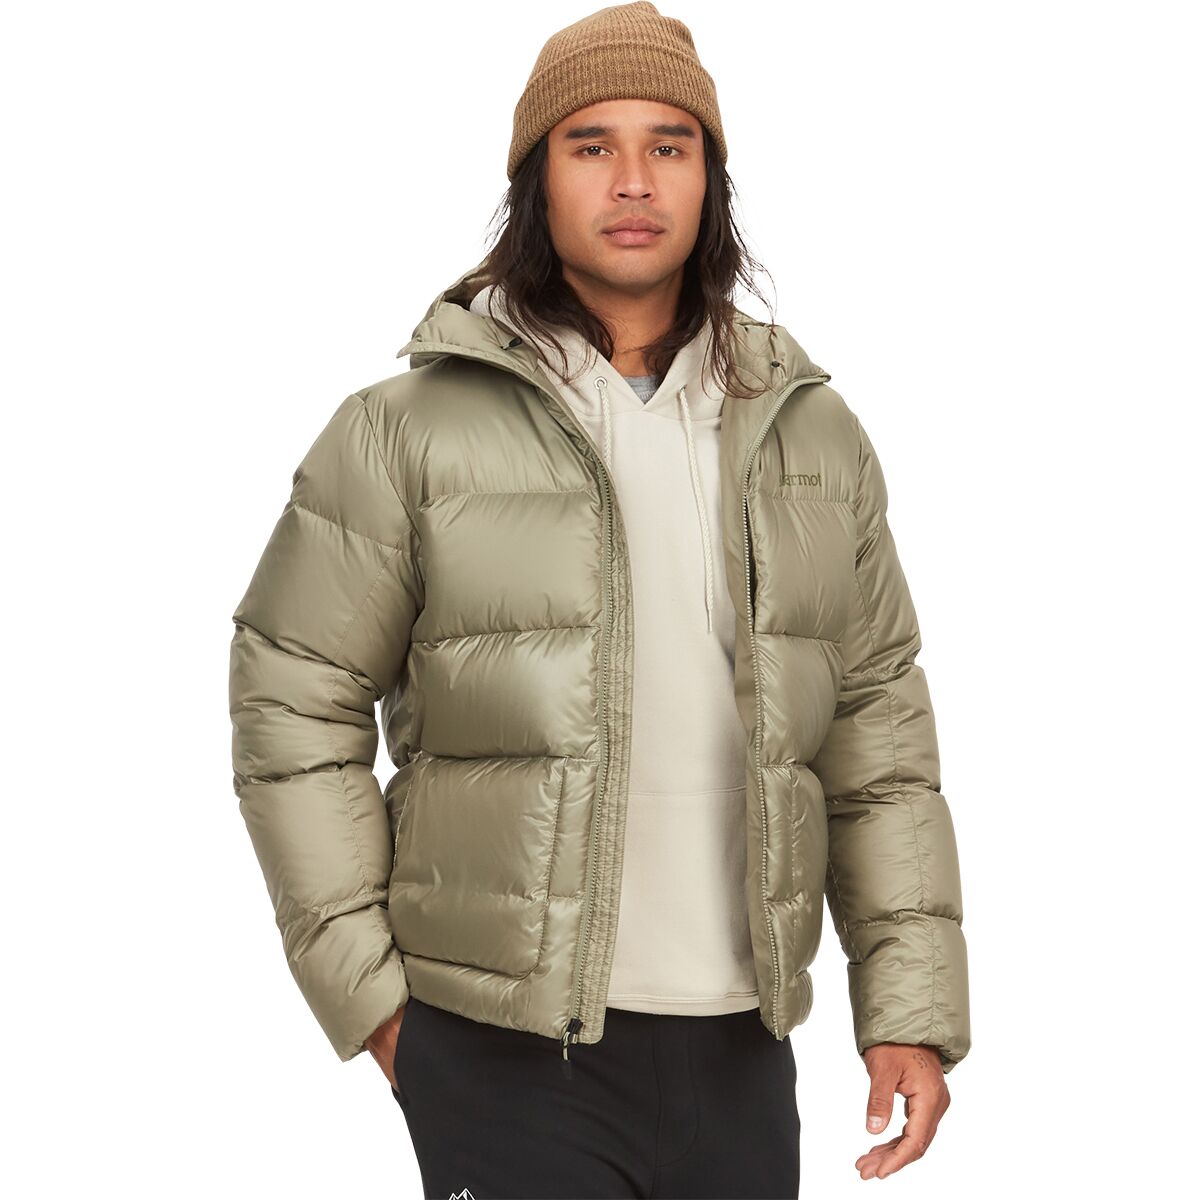 Marmot Guides Down Hooded Jacket - Men's - Clothing